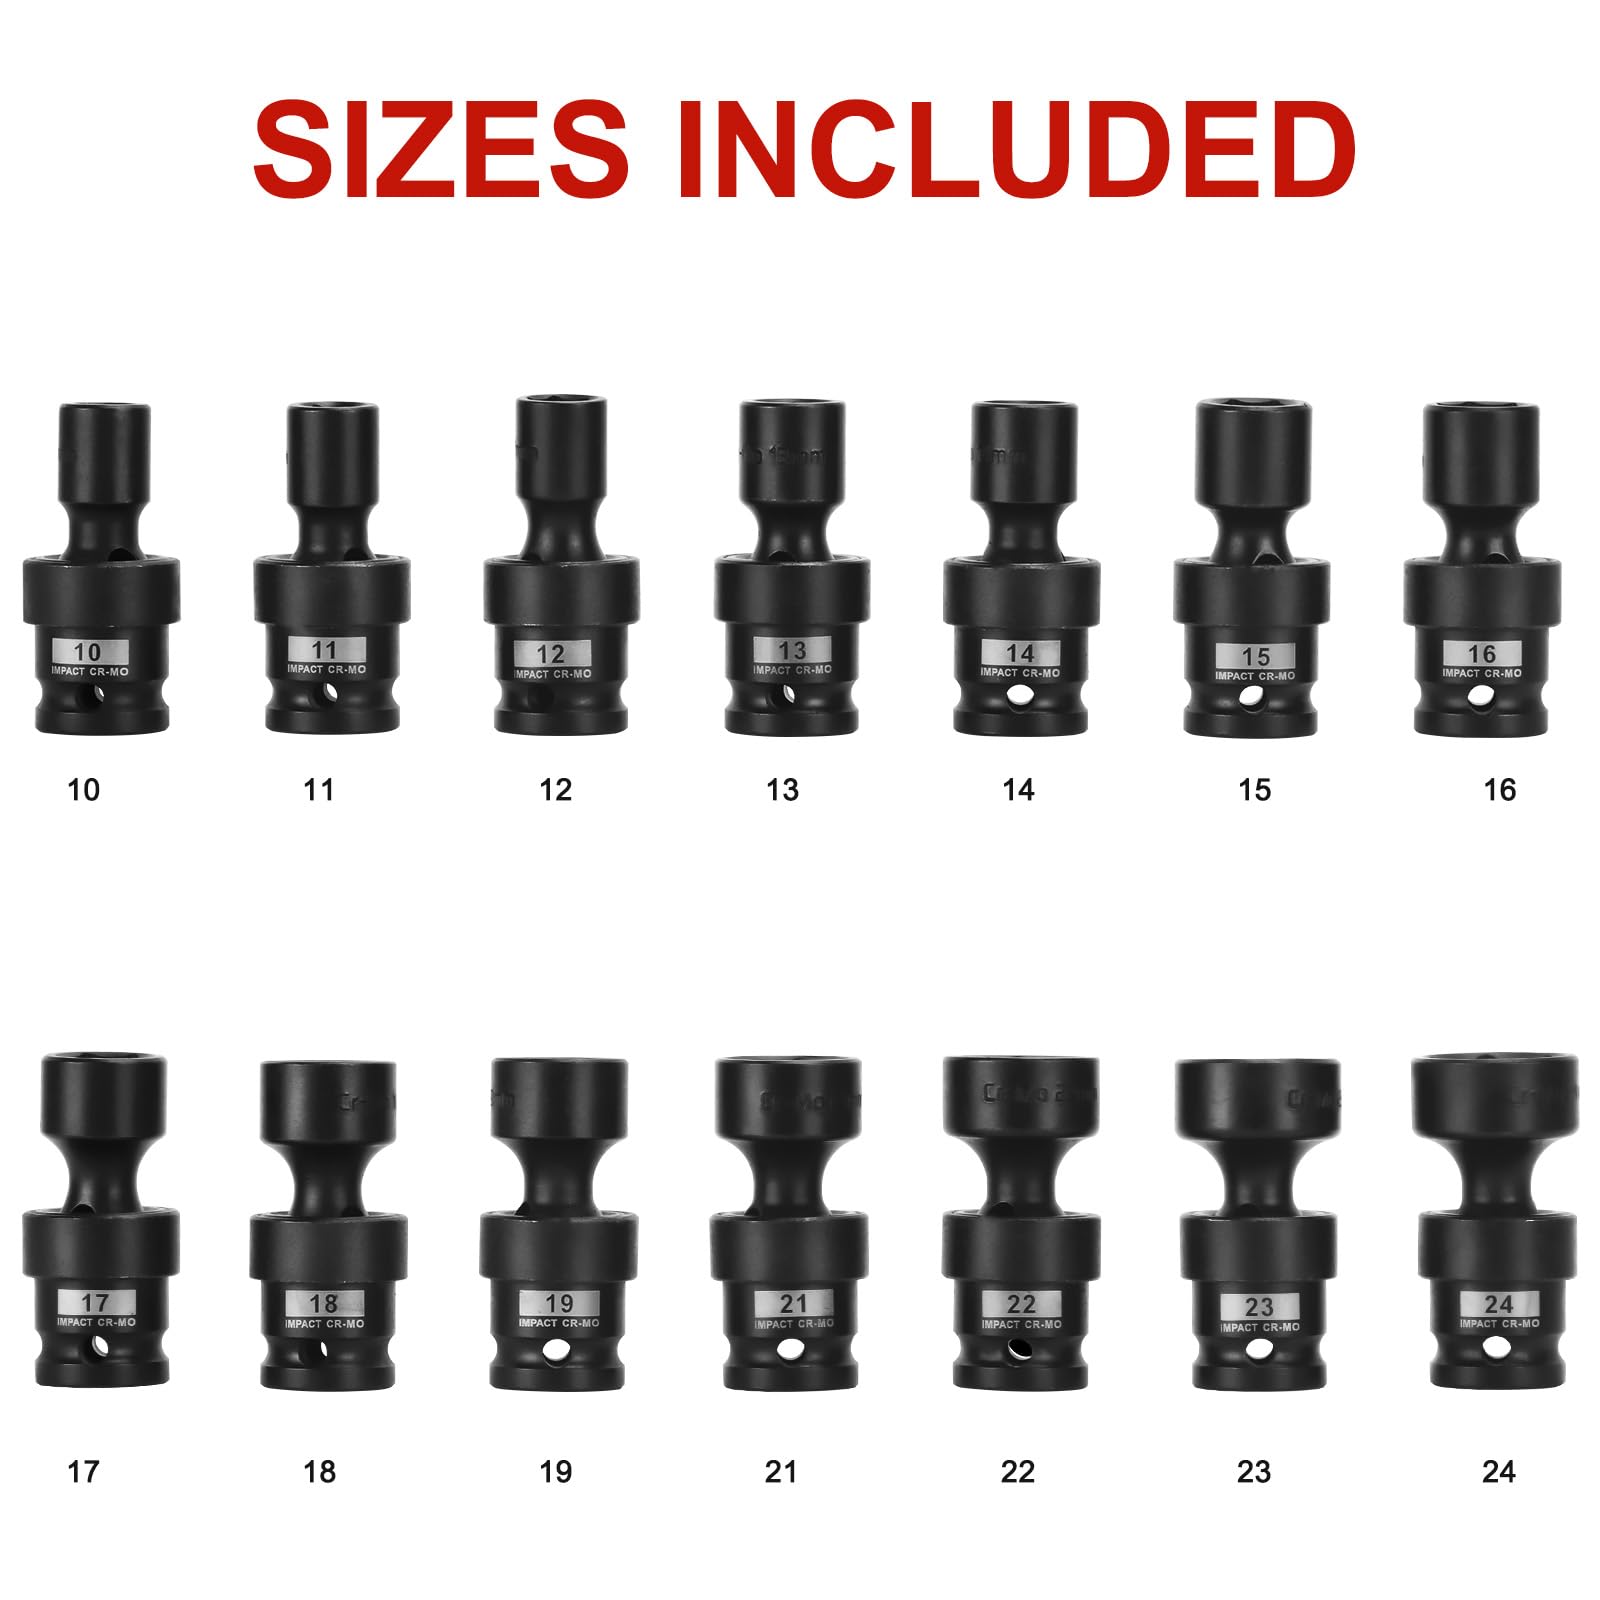 AOBEN 18 PCS 1/2" Drive Shallow Universal Impact Socket Set, Swivel Socket with Flexible Wobble, 6 Point, Metric,10-24mm,Cr-V Steel, Includes Extension Bars and Adapter